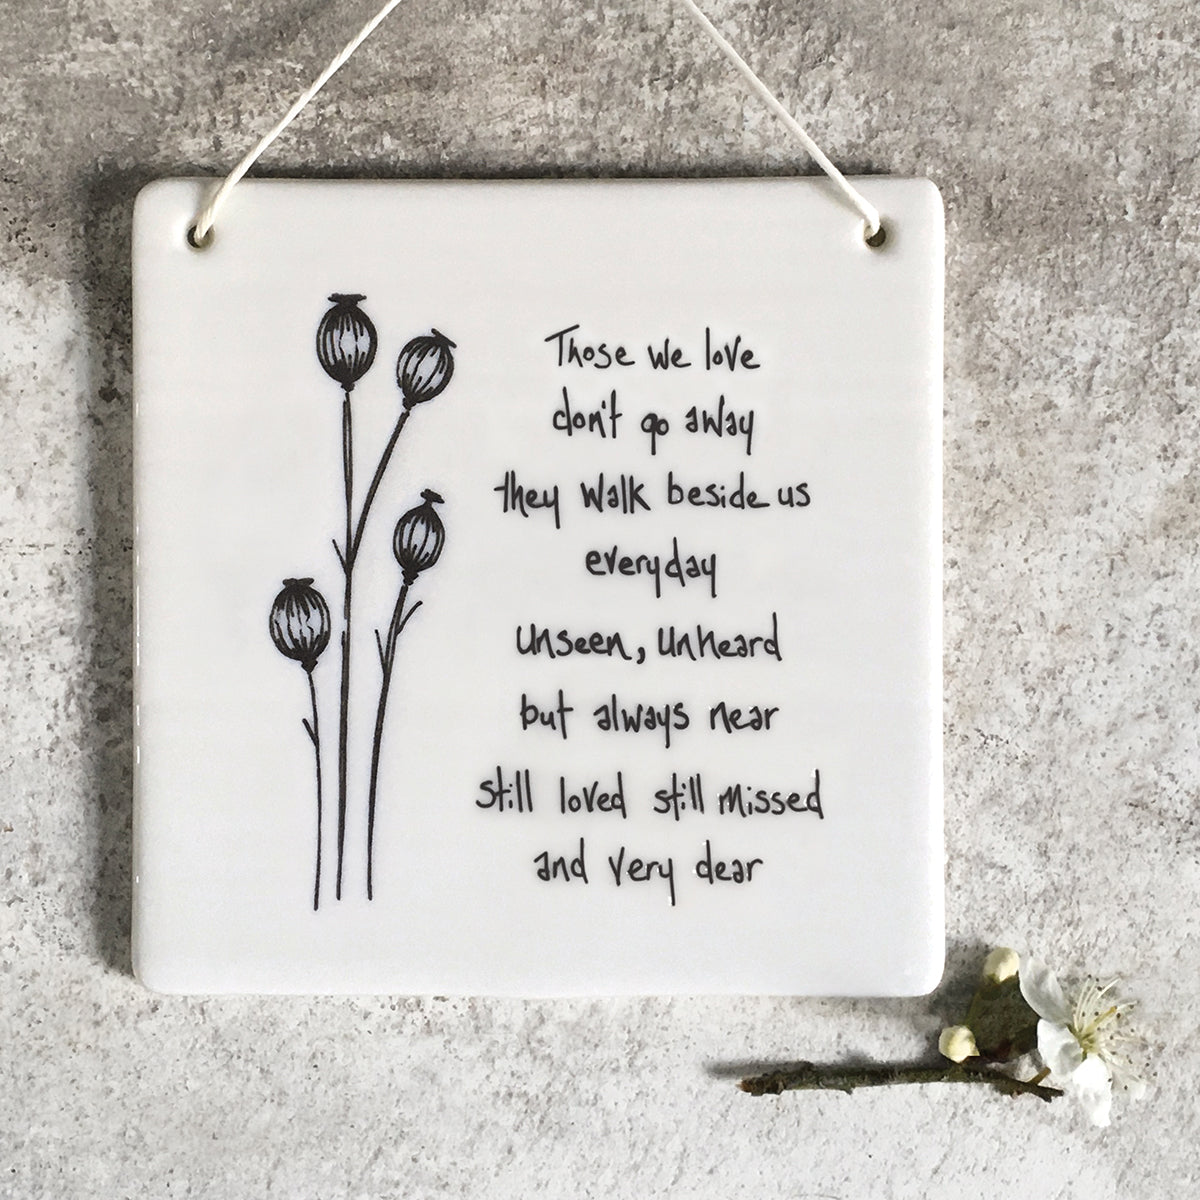 East of India Porcelain square hanging plaque - Those We Love